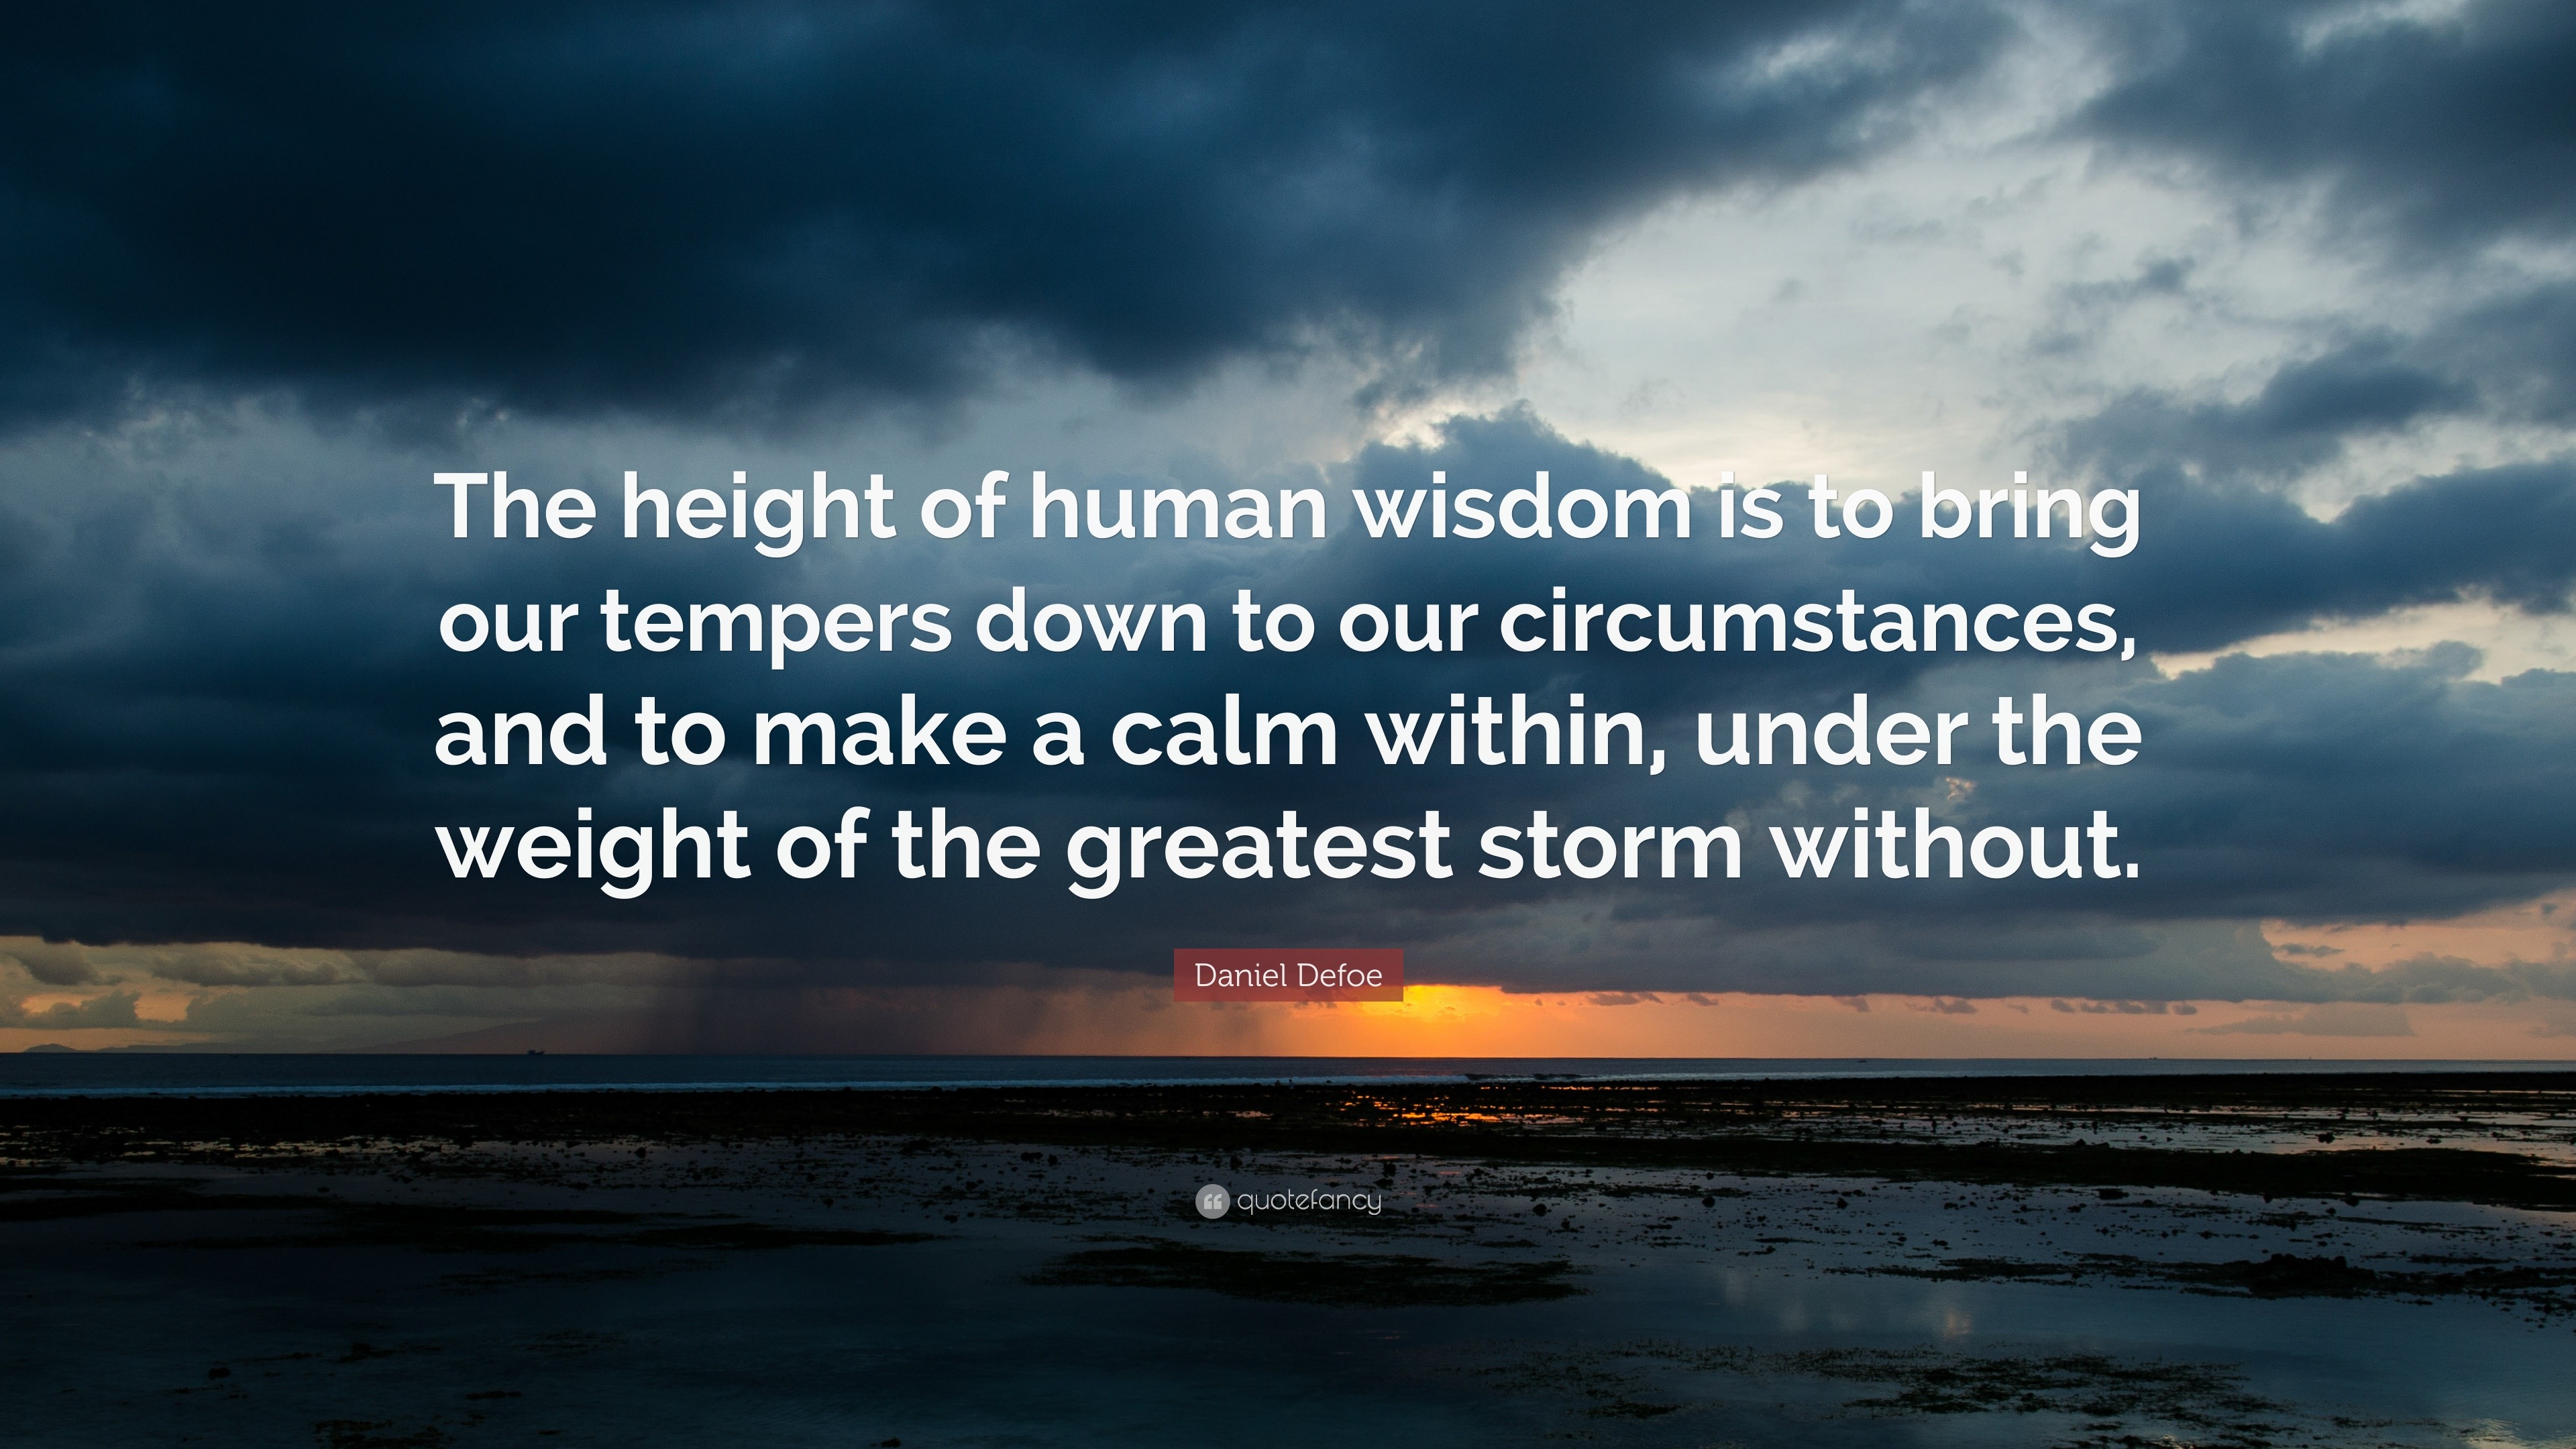 Daniel Defoe Quote: “The height of human wisdom is to bring our tempers ...